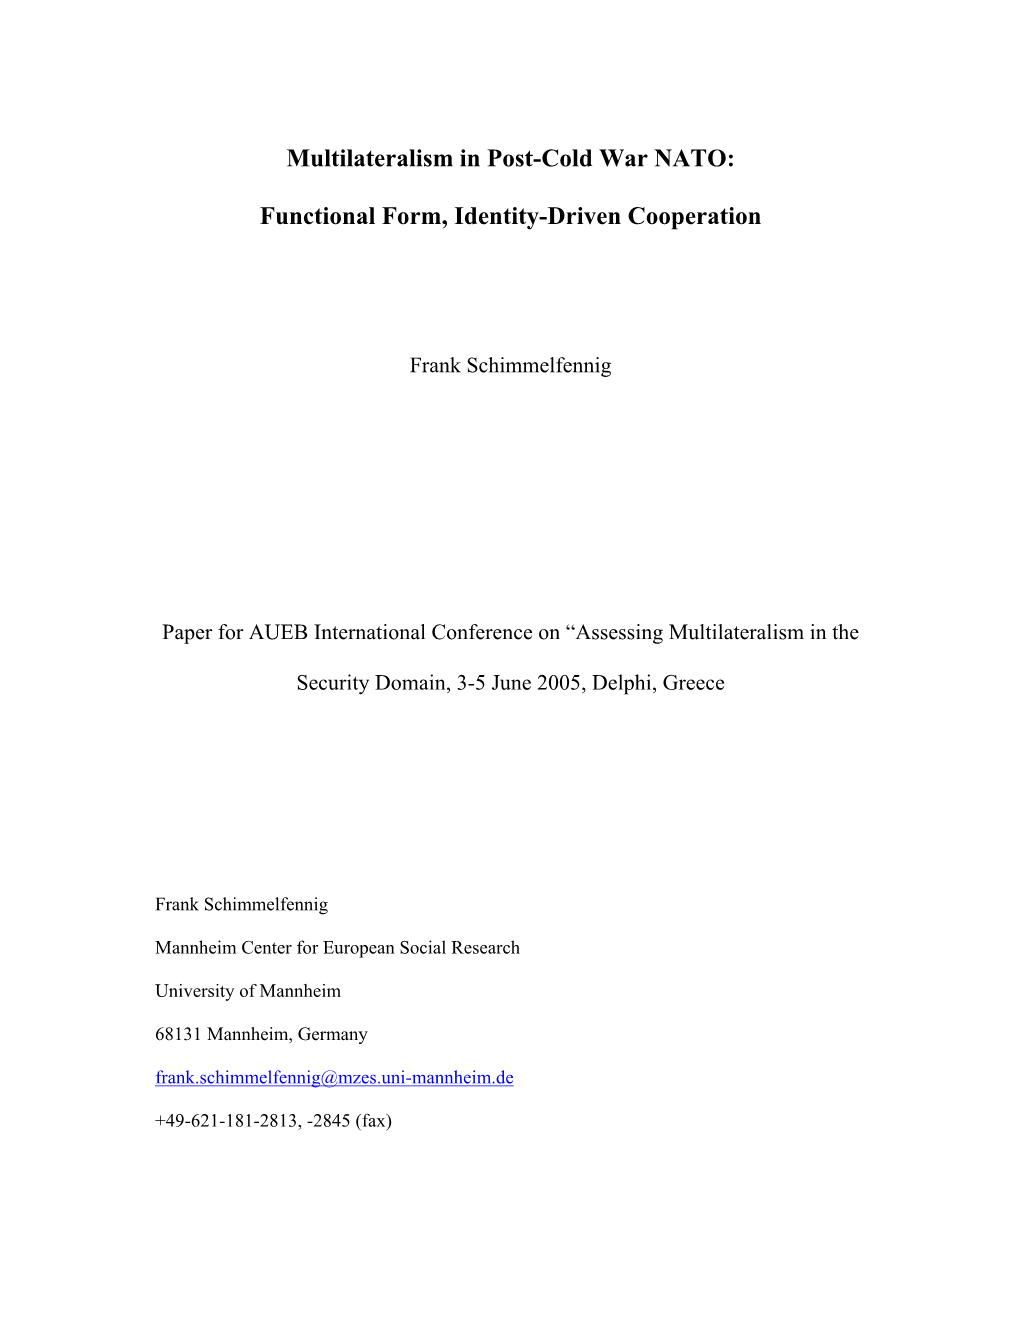 Multilateralism in Post-Cold War NATO: Functional Form, Identity